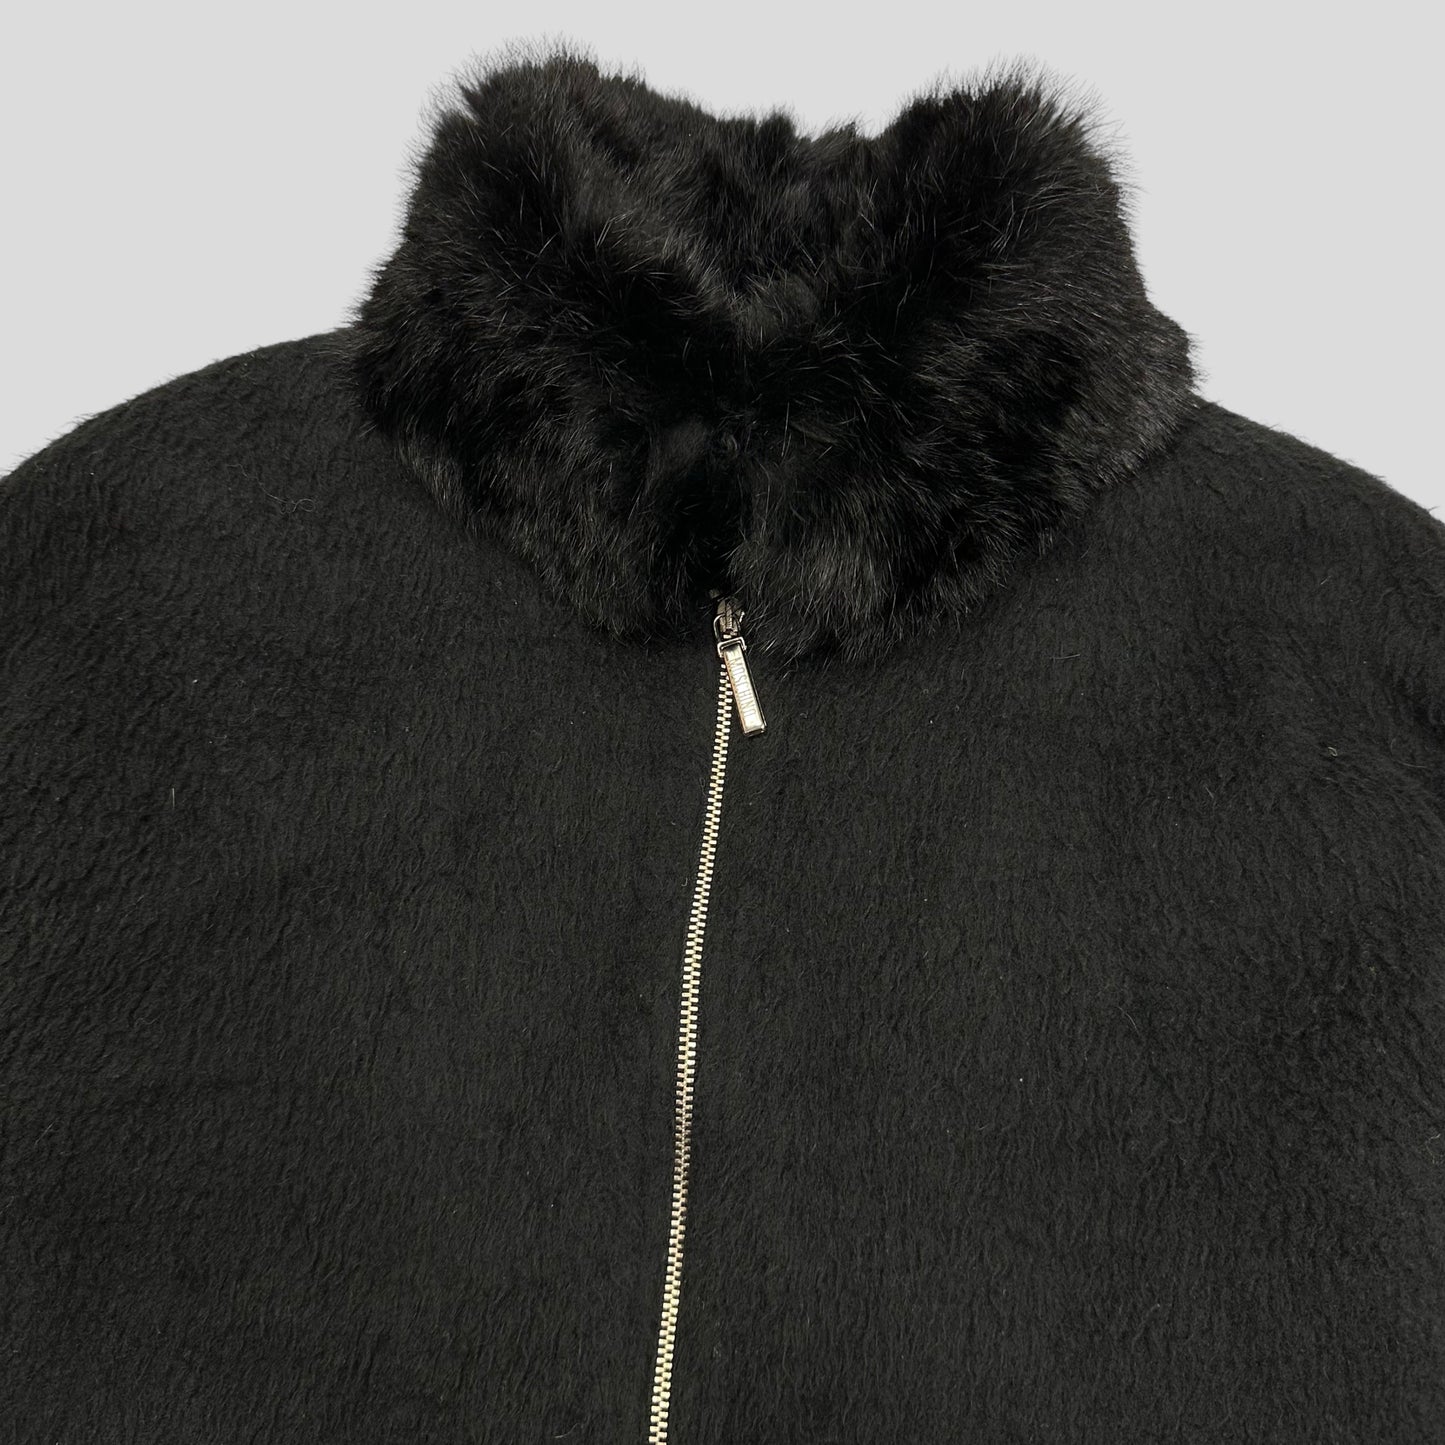 Moschino Jeans 00’s Rabbit Fur Collar Cropped Furry Jacket - UK8-12